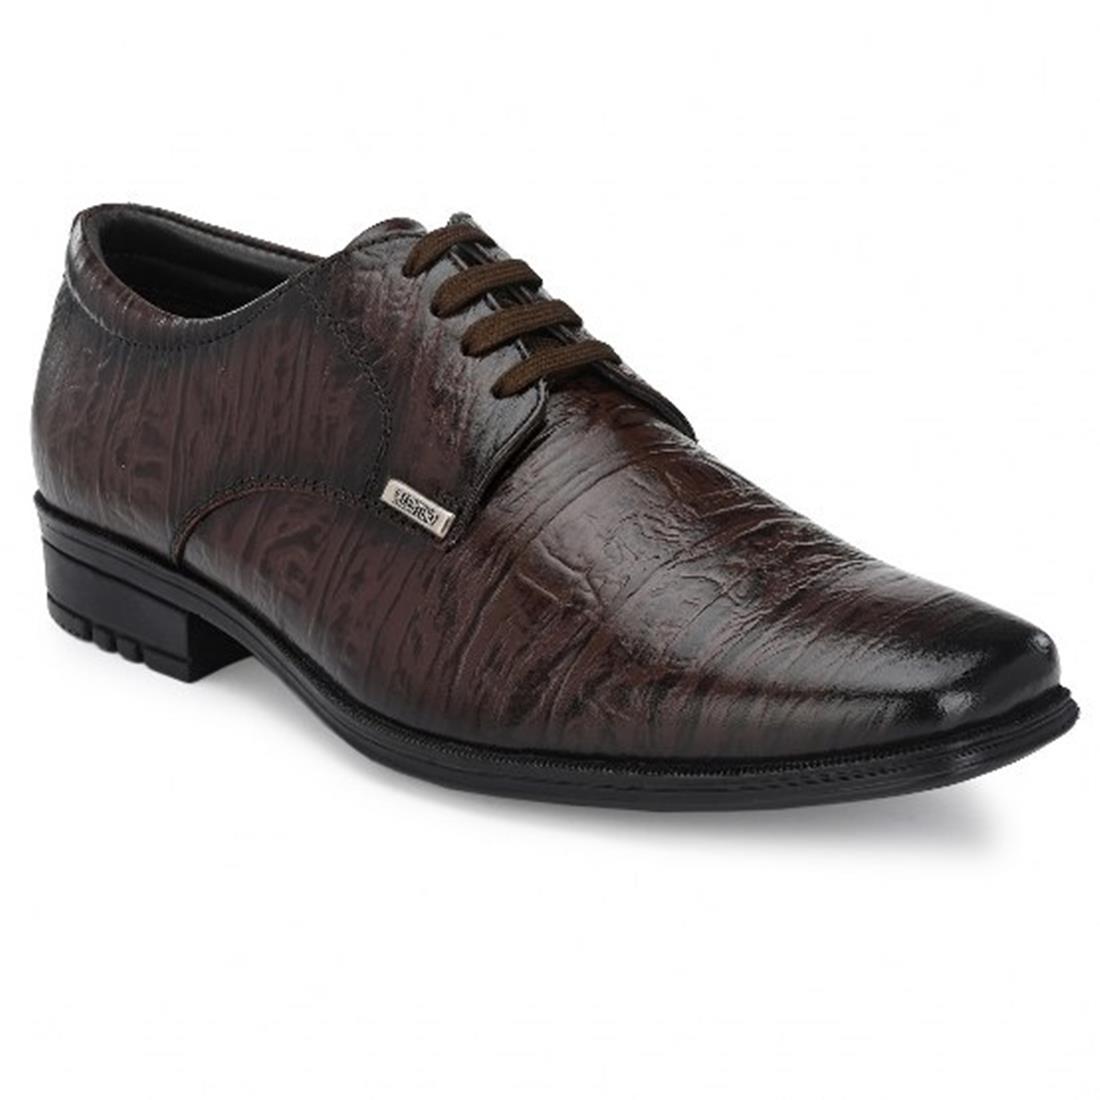 NEWTOP-63 MEN LEATHER BROWN FORMAL LACE UP DERBY